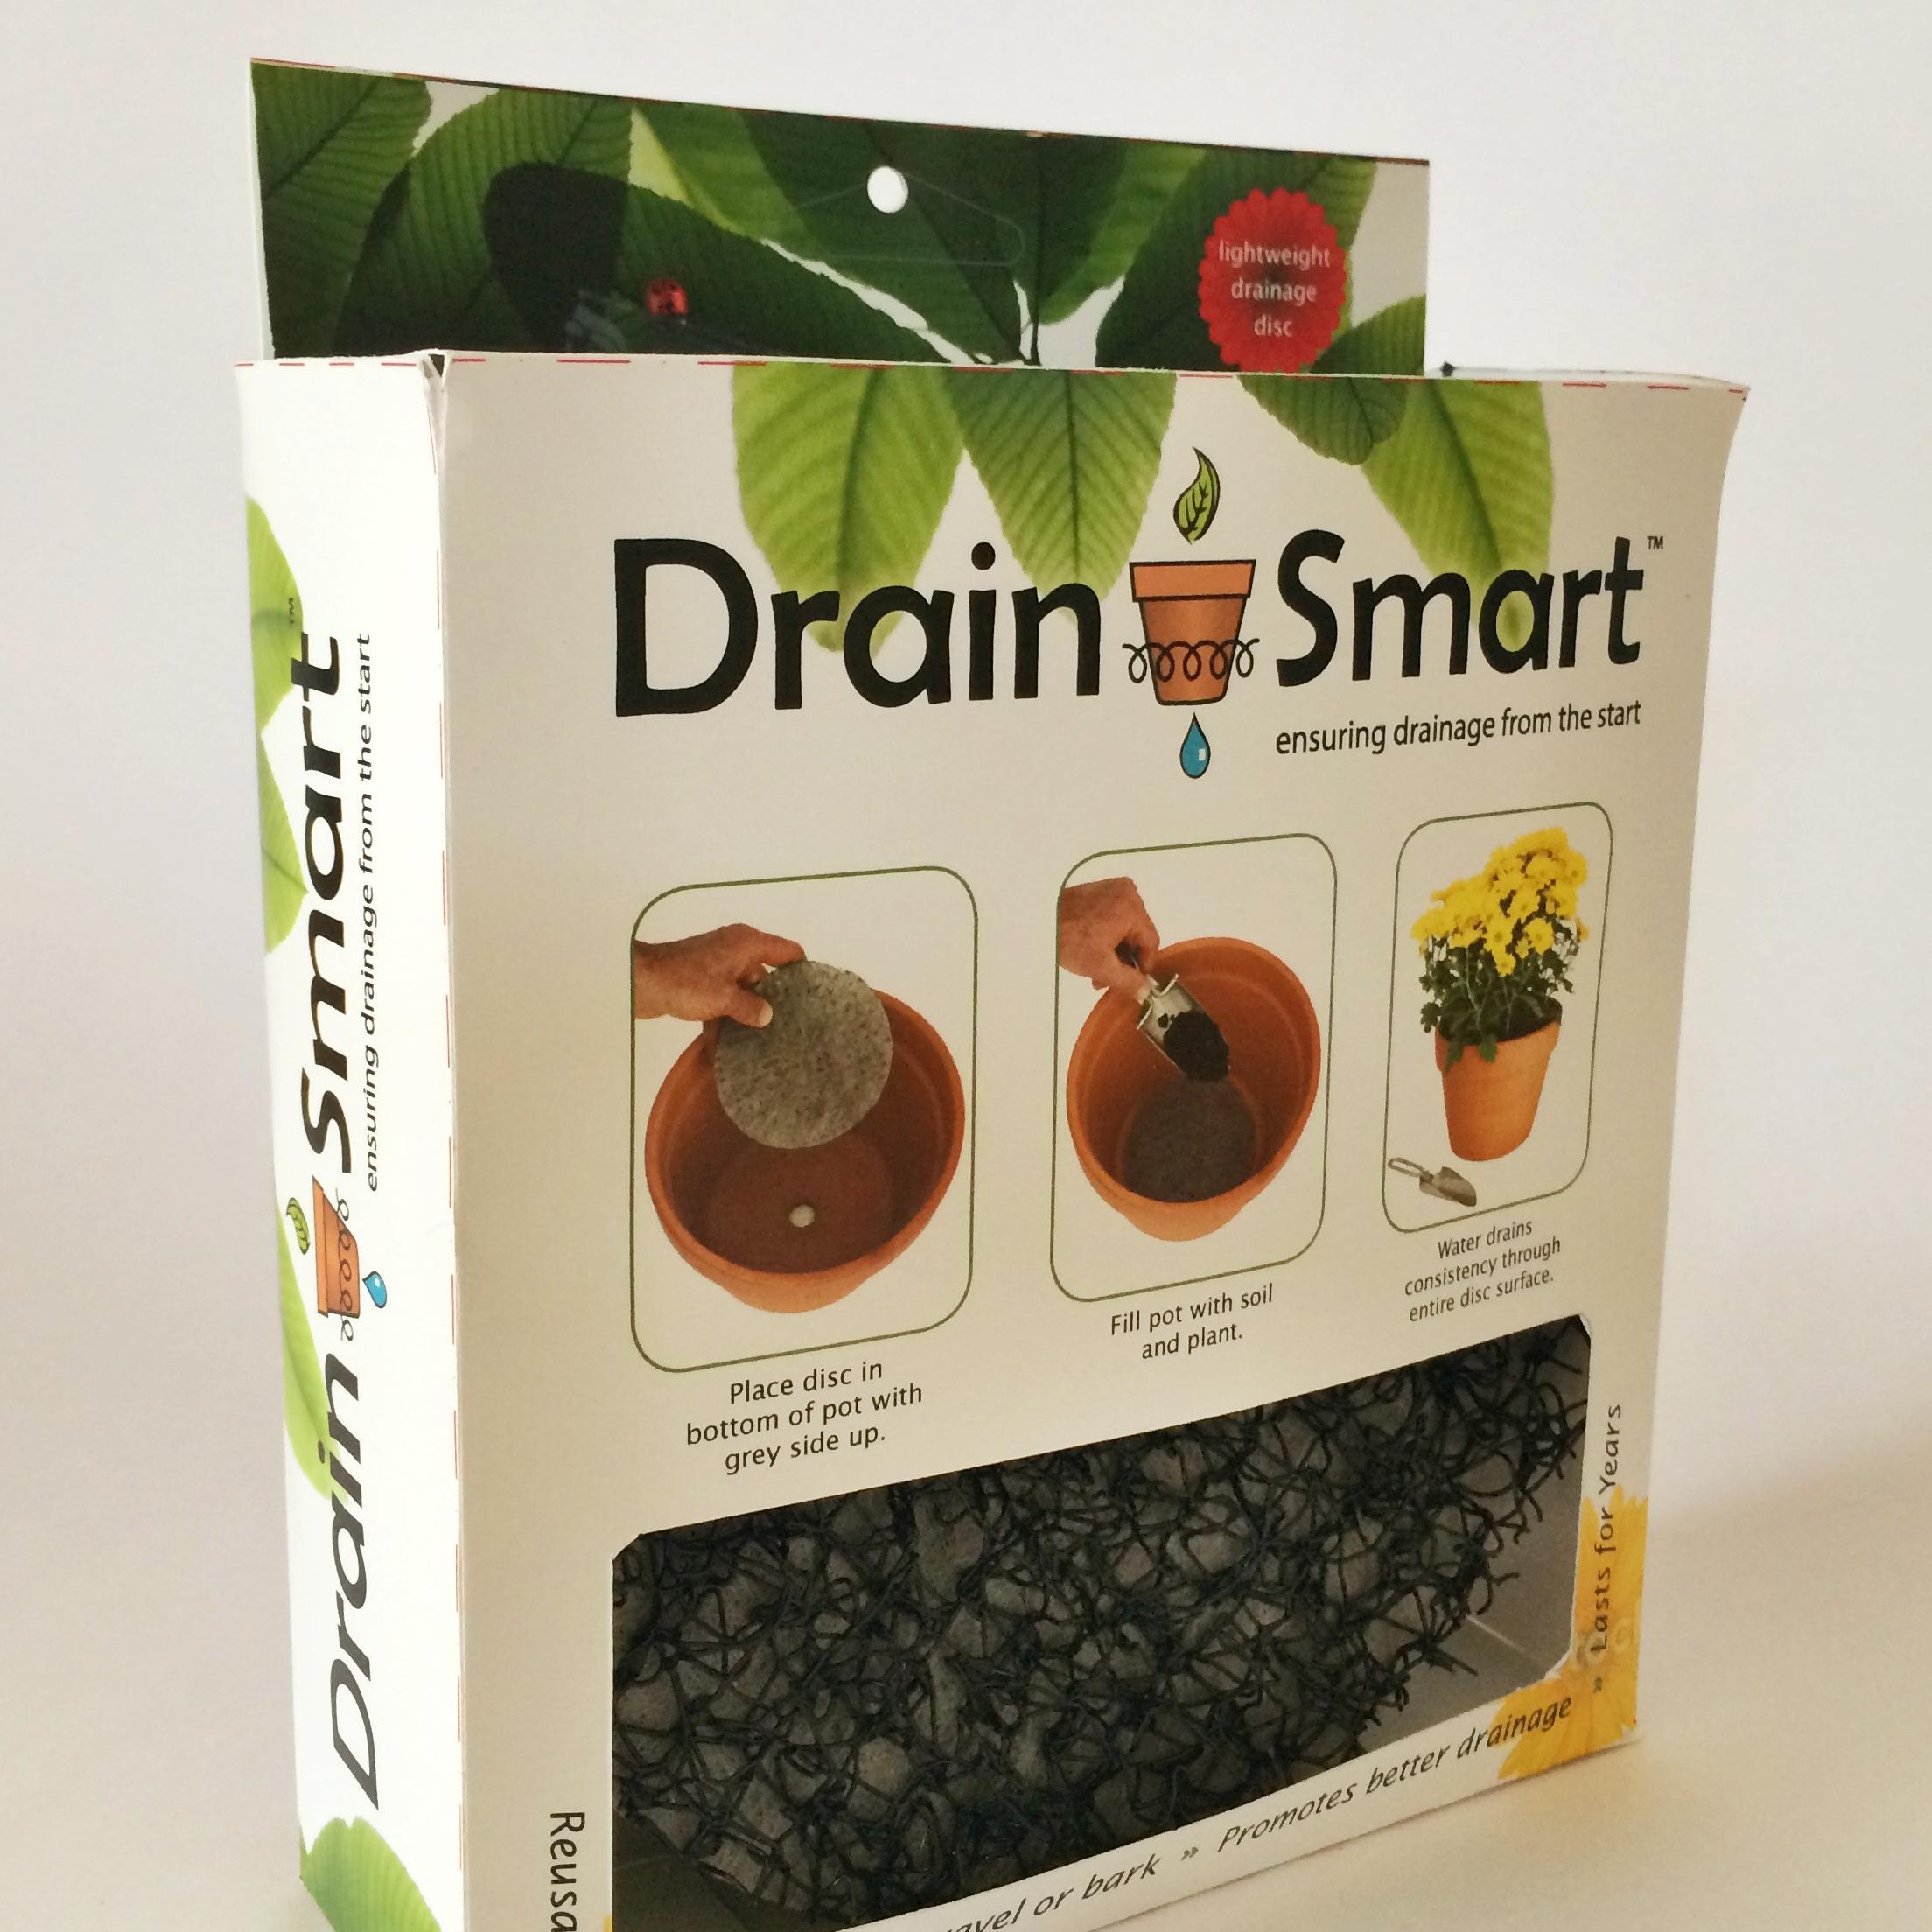 Drain Smart - convenient & easy container-drainer discs for pots. No need for messy gravel or bark. Simply place the Drain Smart disc in your pot. That's it!